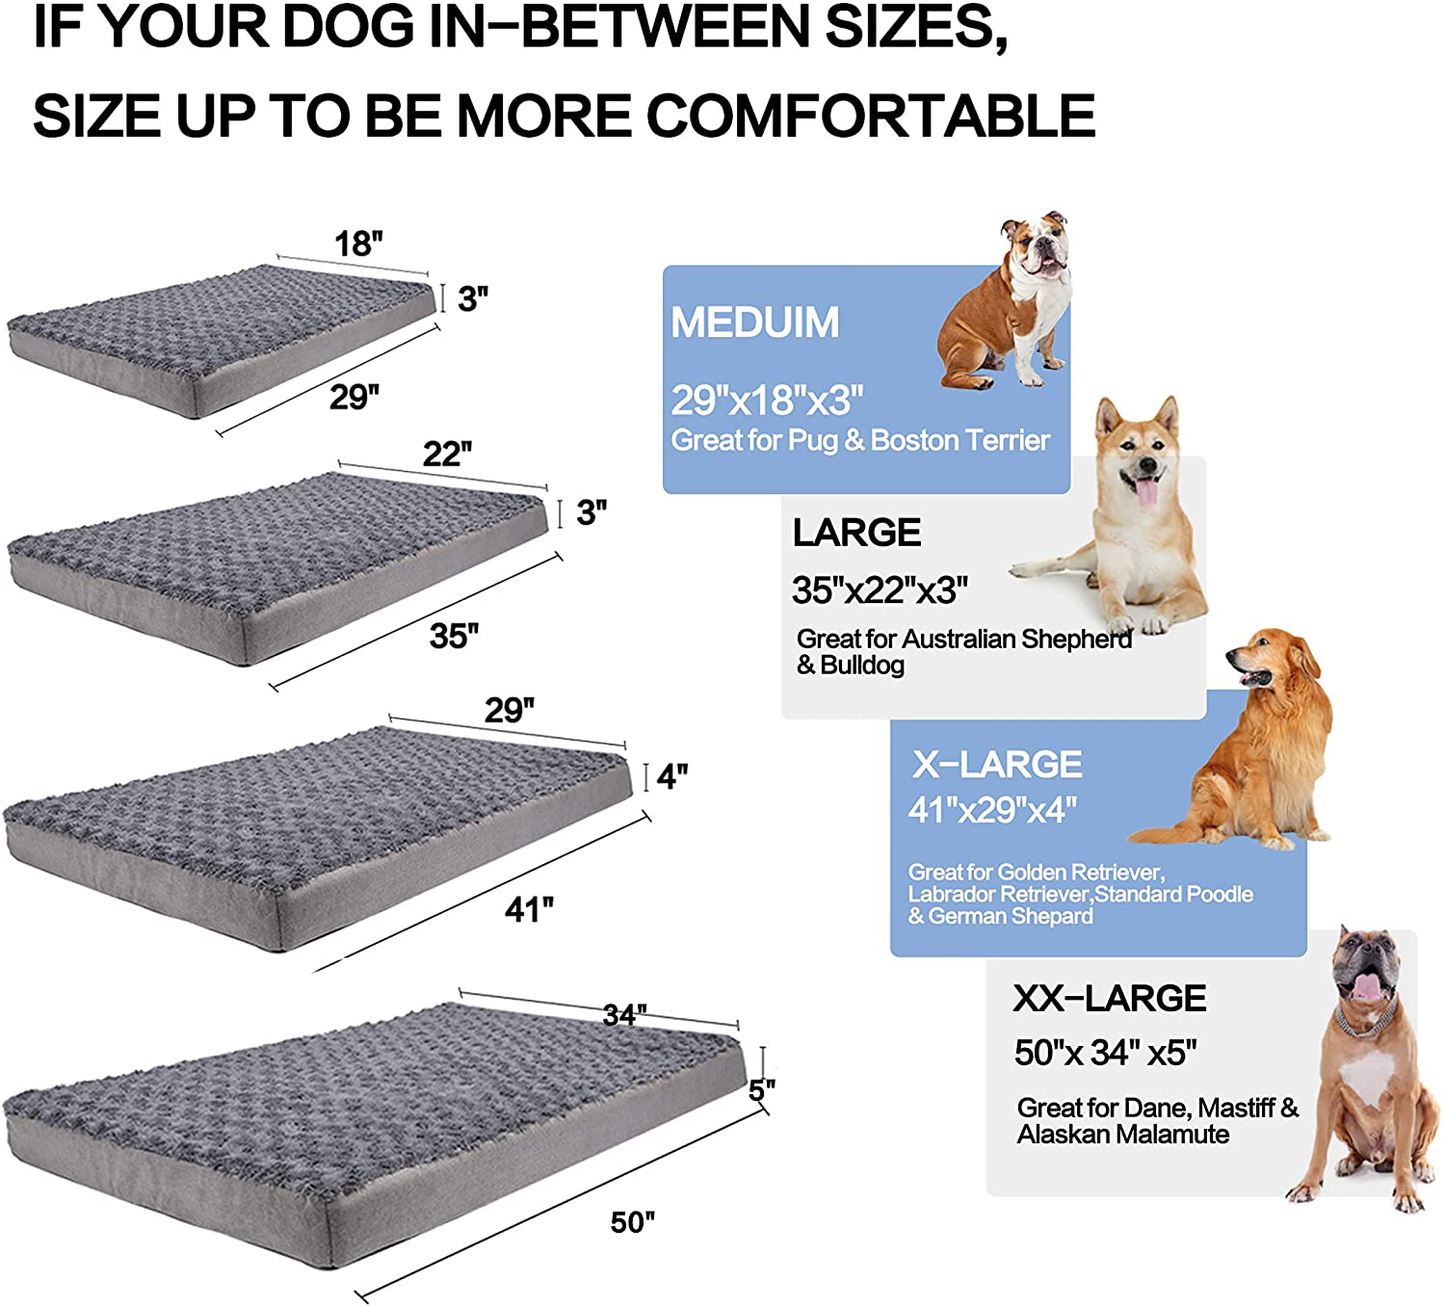 GOHOO PET Memory Foam Dog Bed with Cooling Gel, Orthopedic Joint Relief Dog Crate Mat, Removable Machine Washable Cover & Waterproof Lining , for Small Medium Large Pets